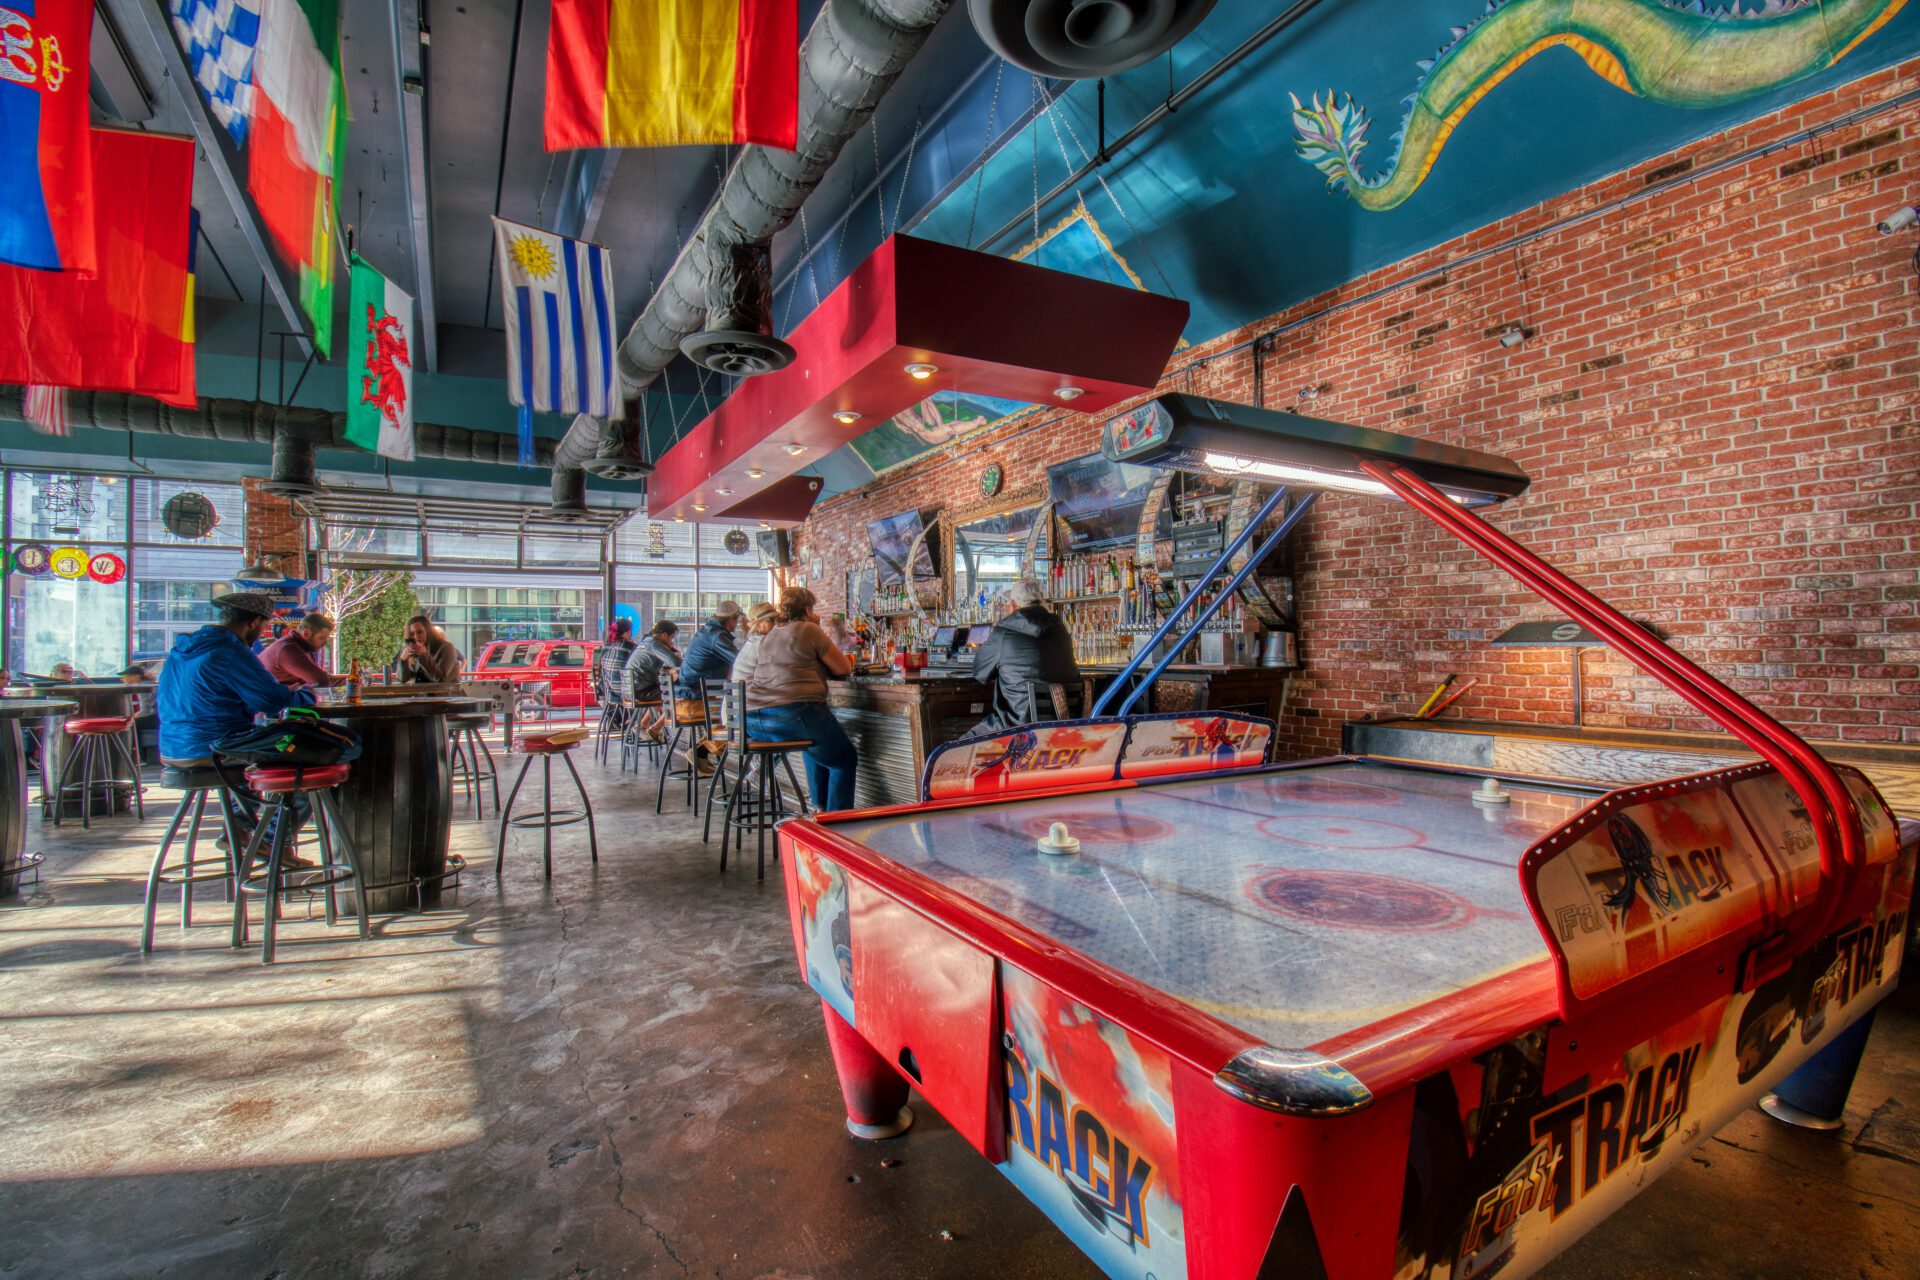 air hockey table with people in barstools and tables